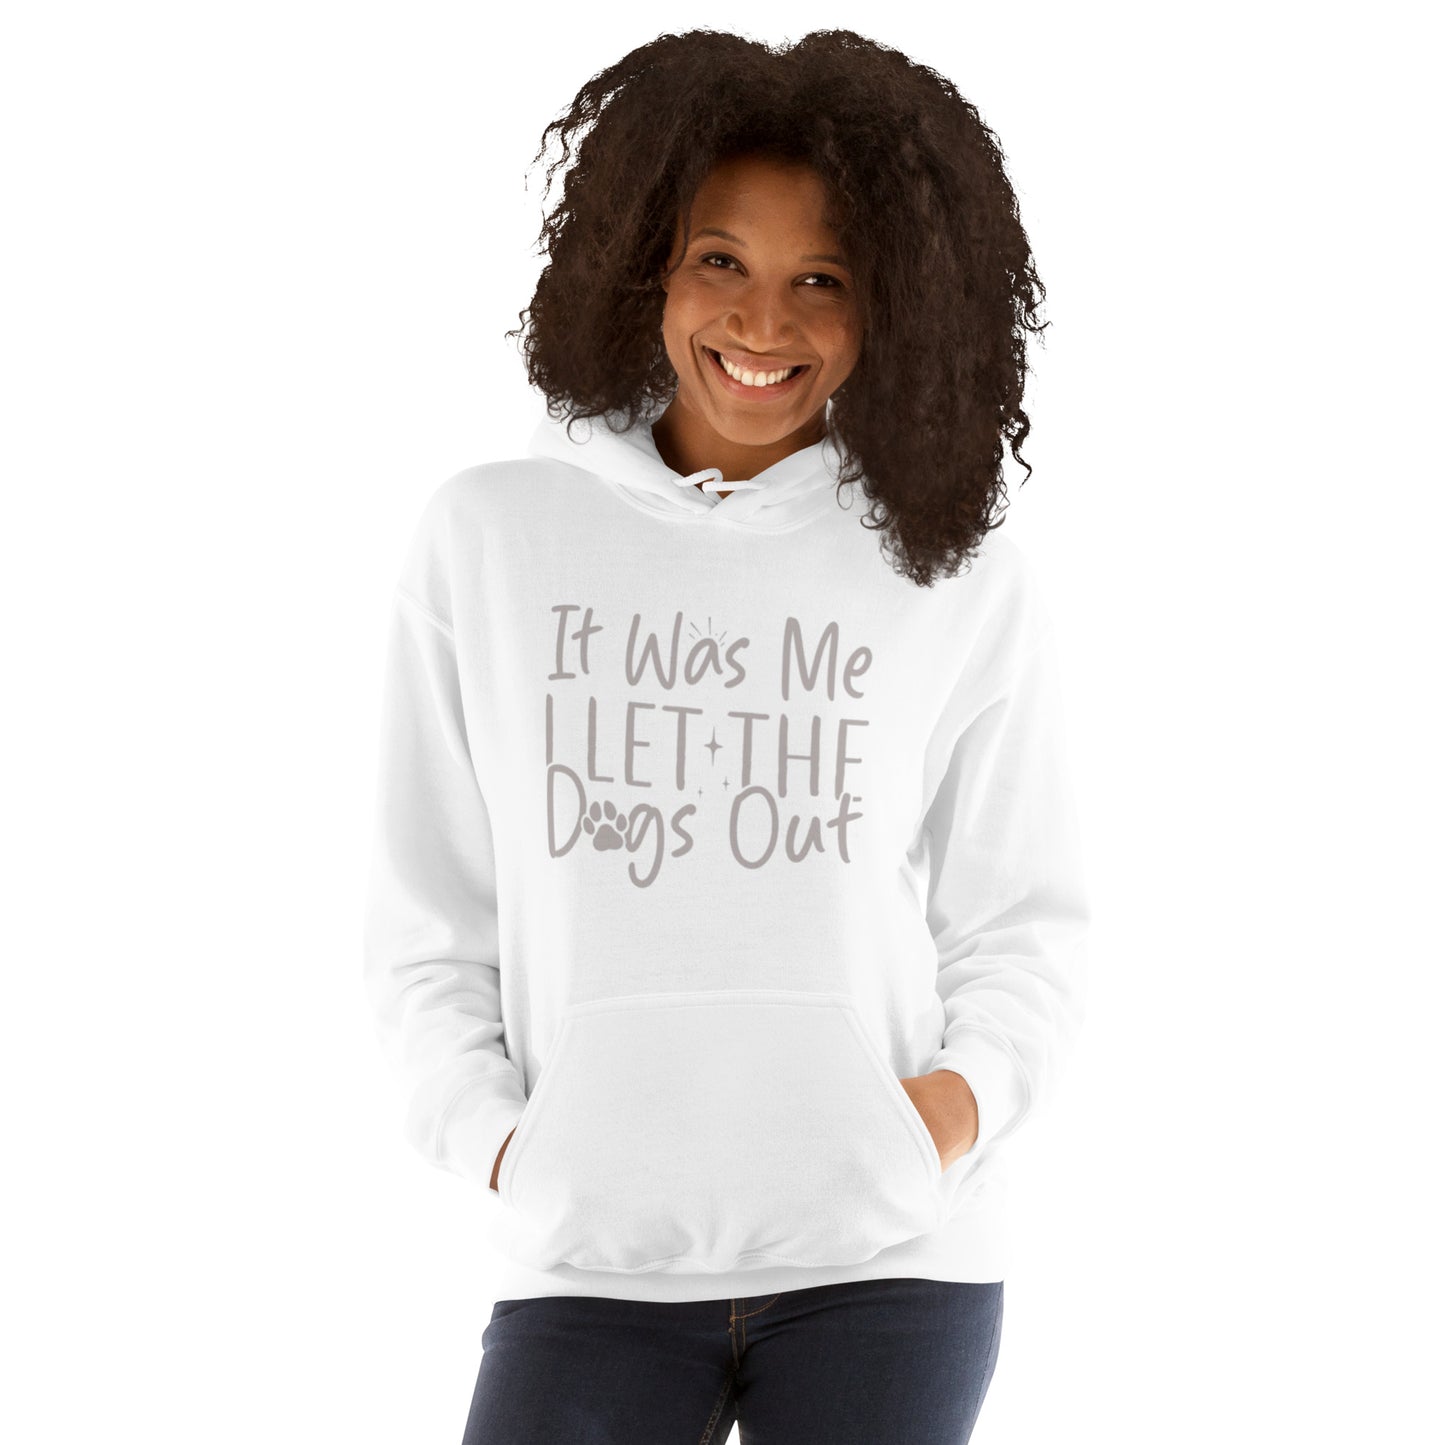 It was Me I Let the Dogs Out Unisex Hoodie